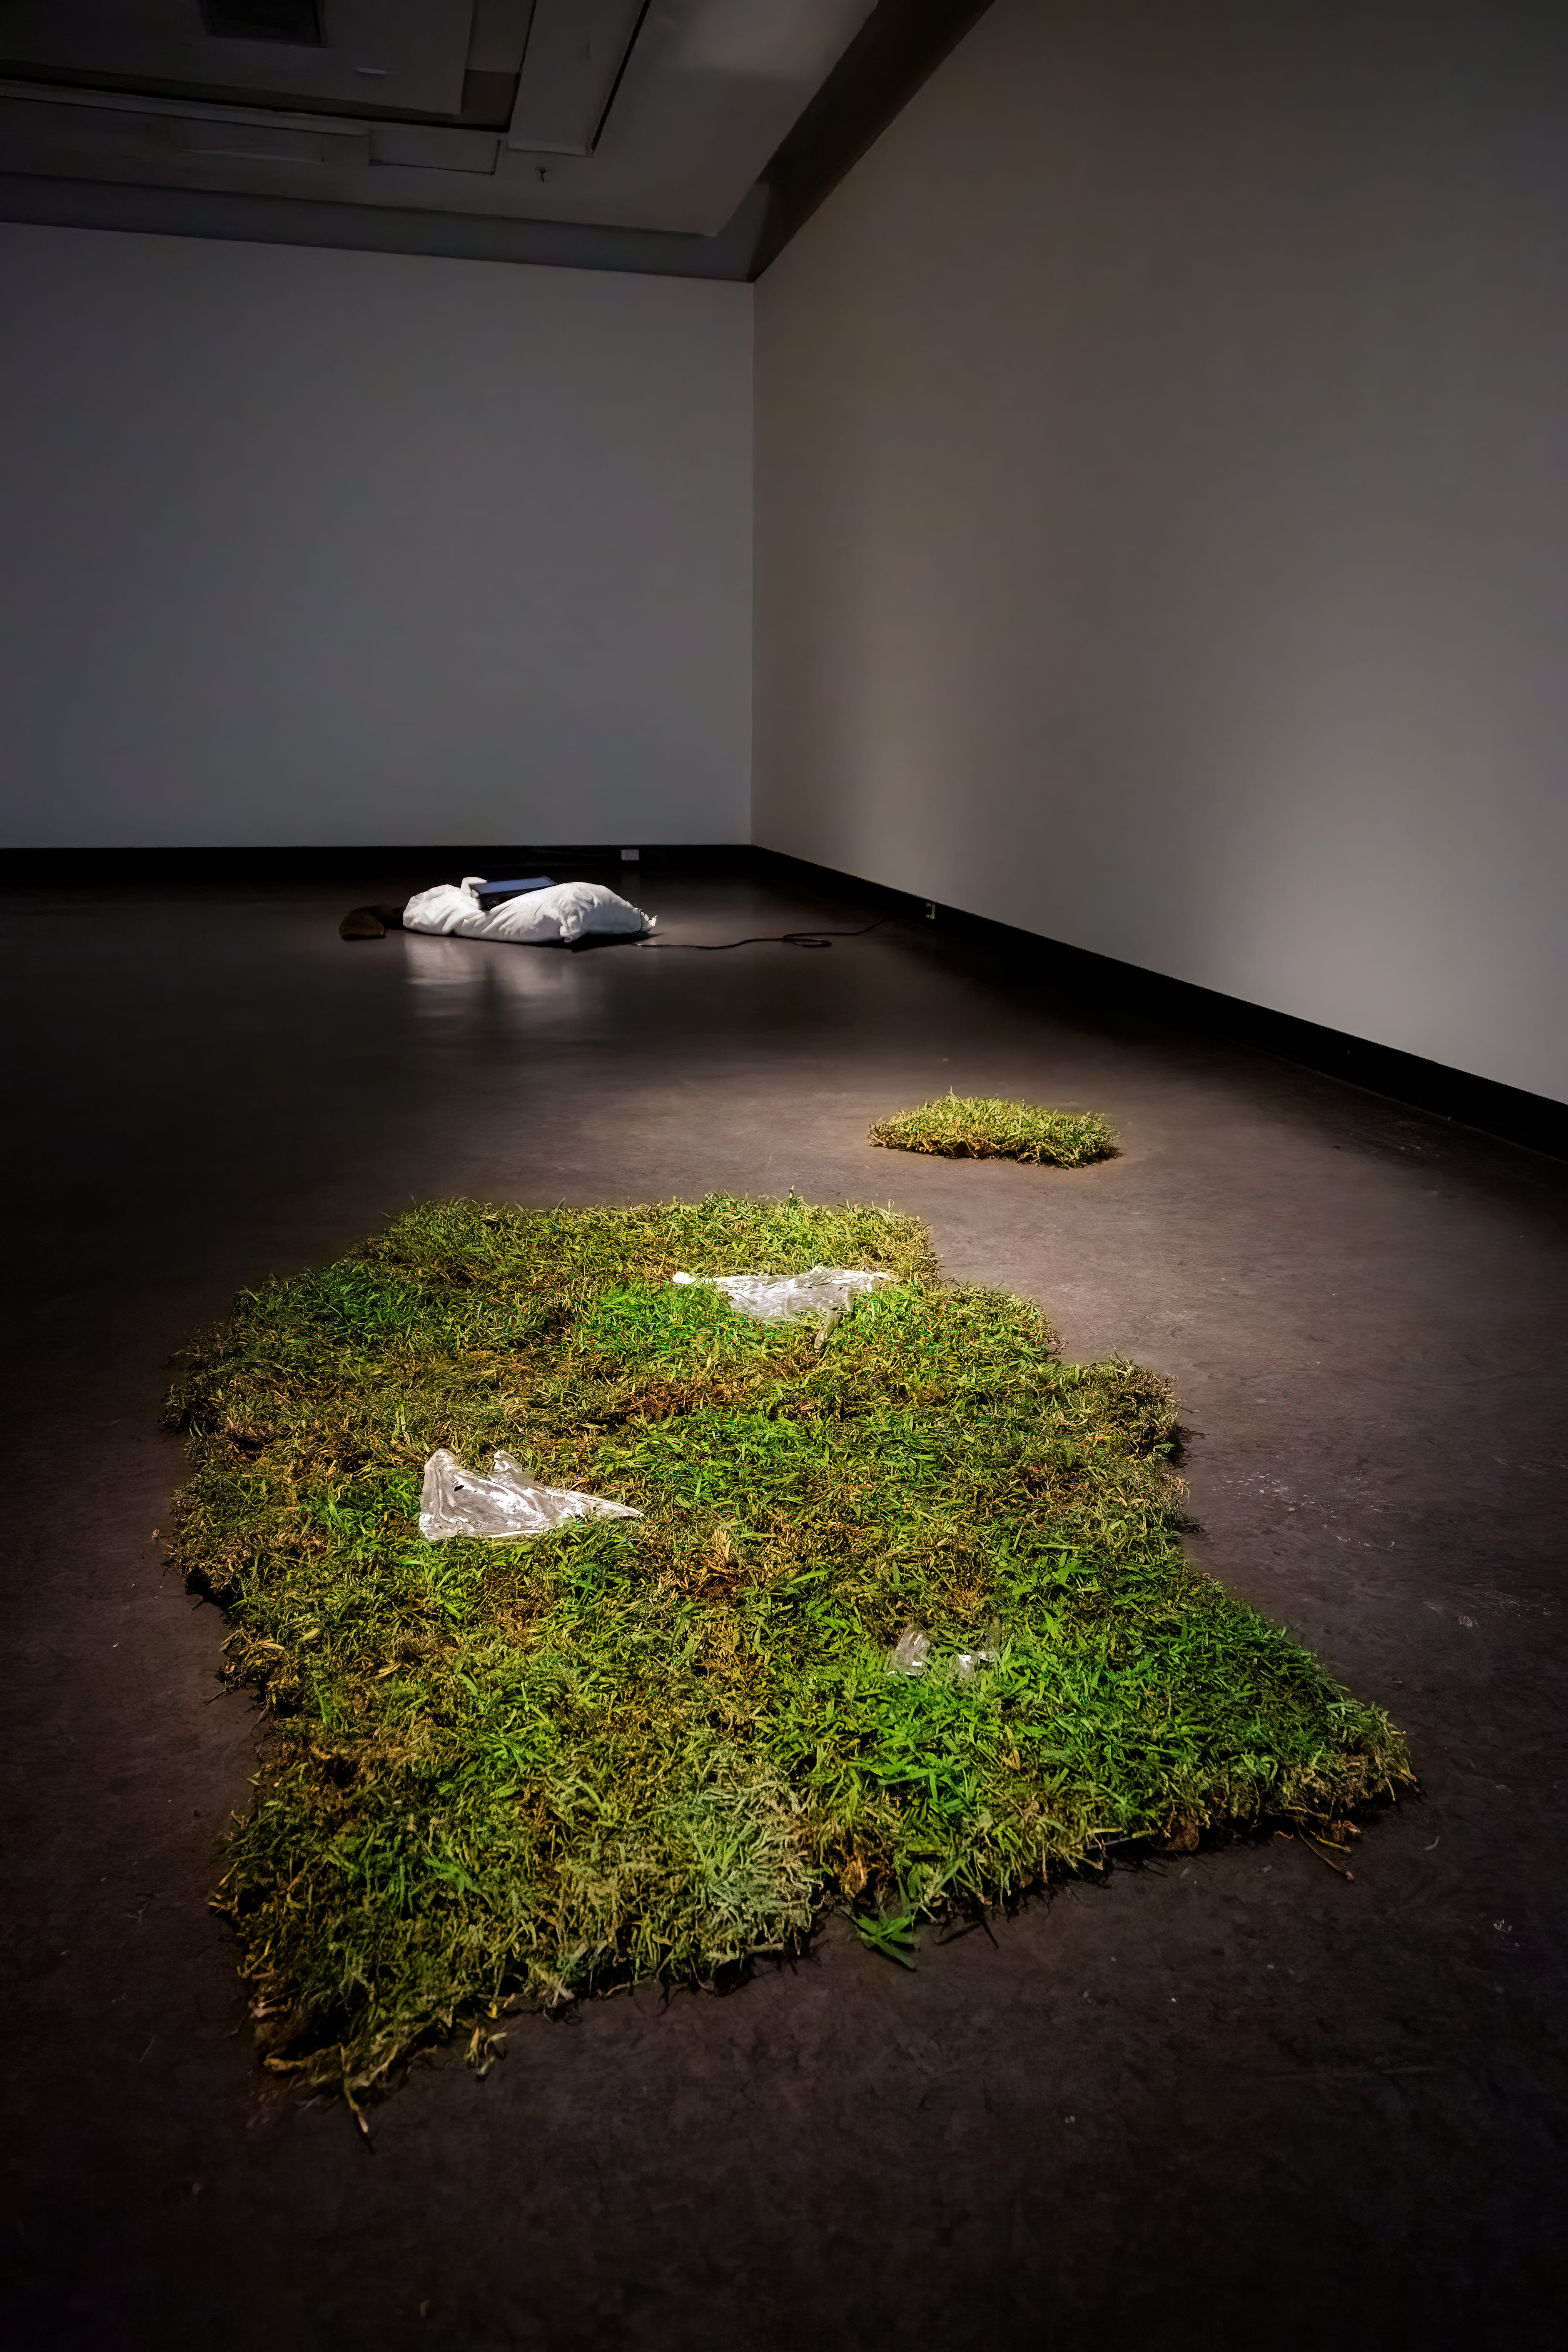 installation shot of two grass piles with pewter, a white sack with a tv can be seen in background